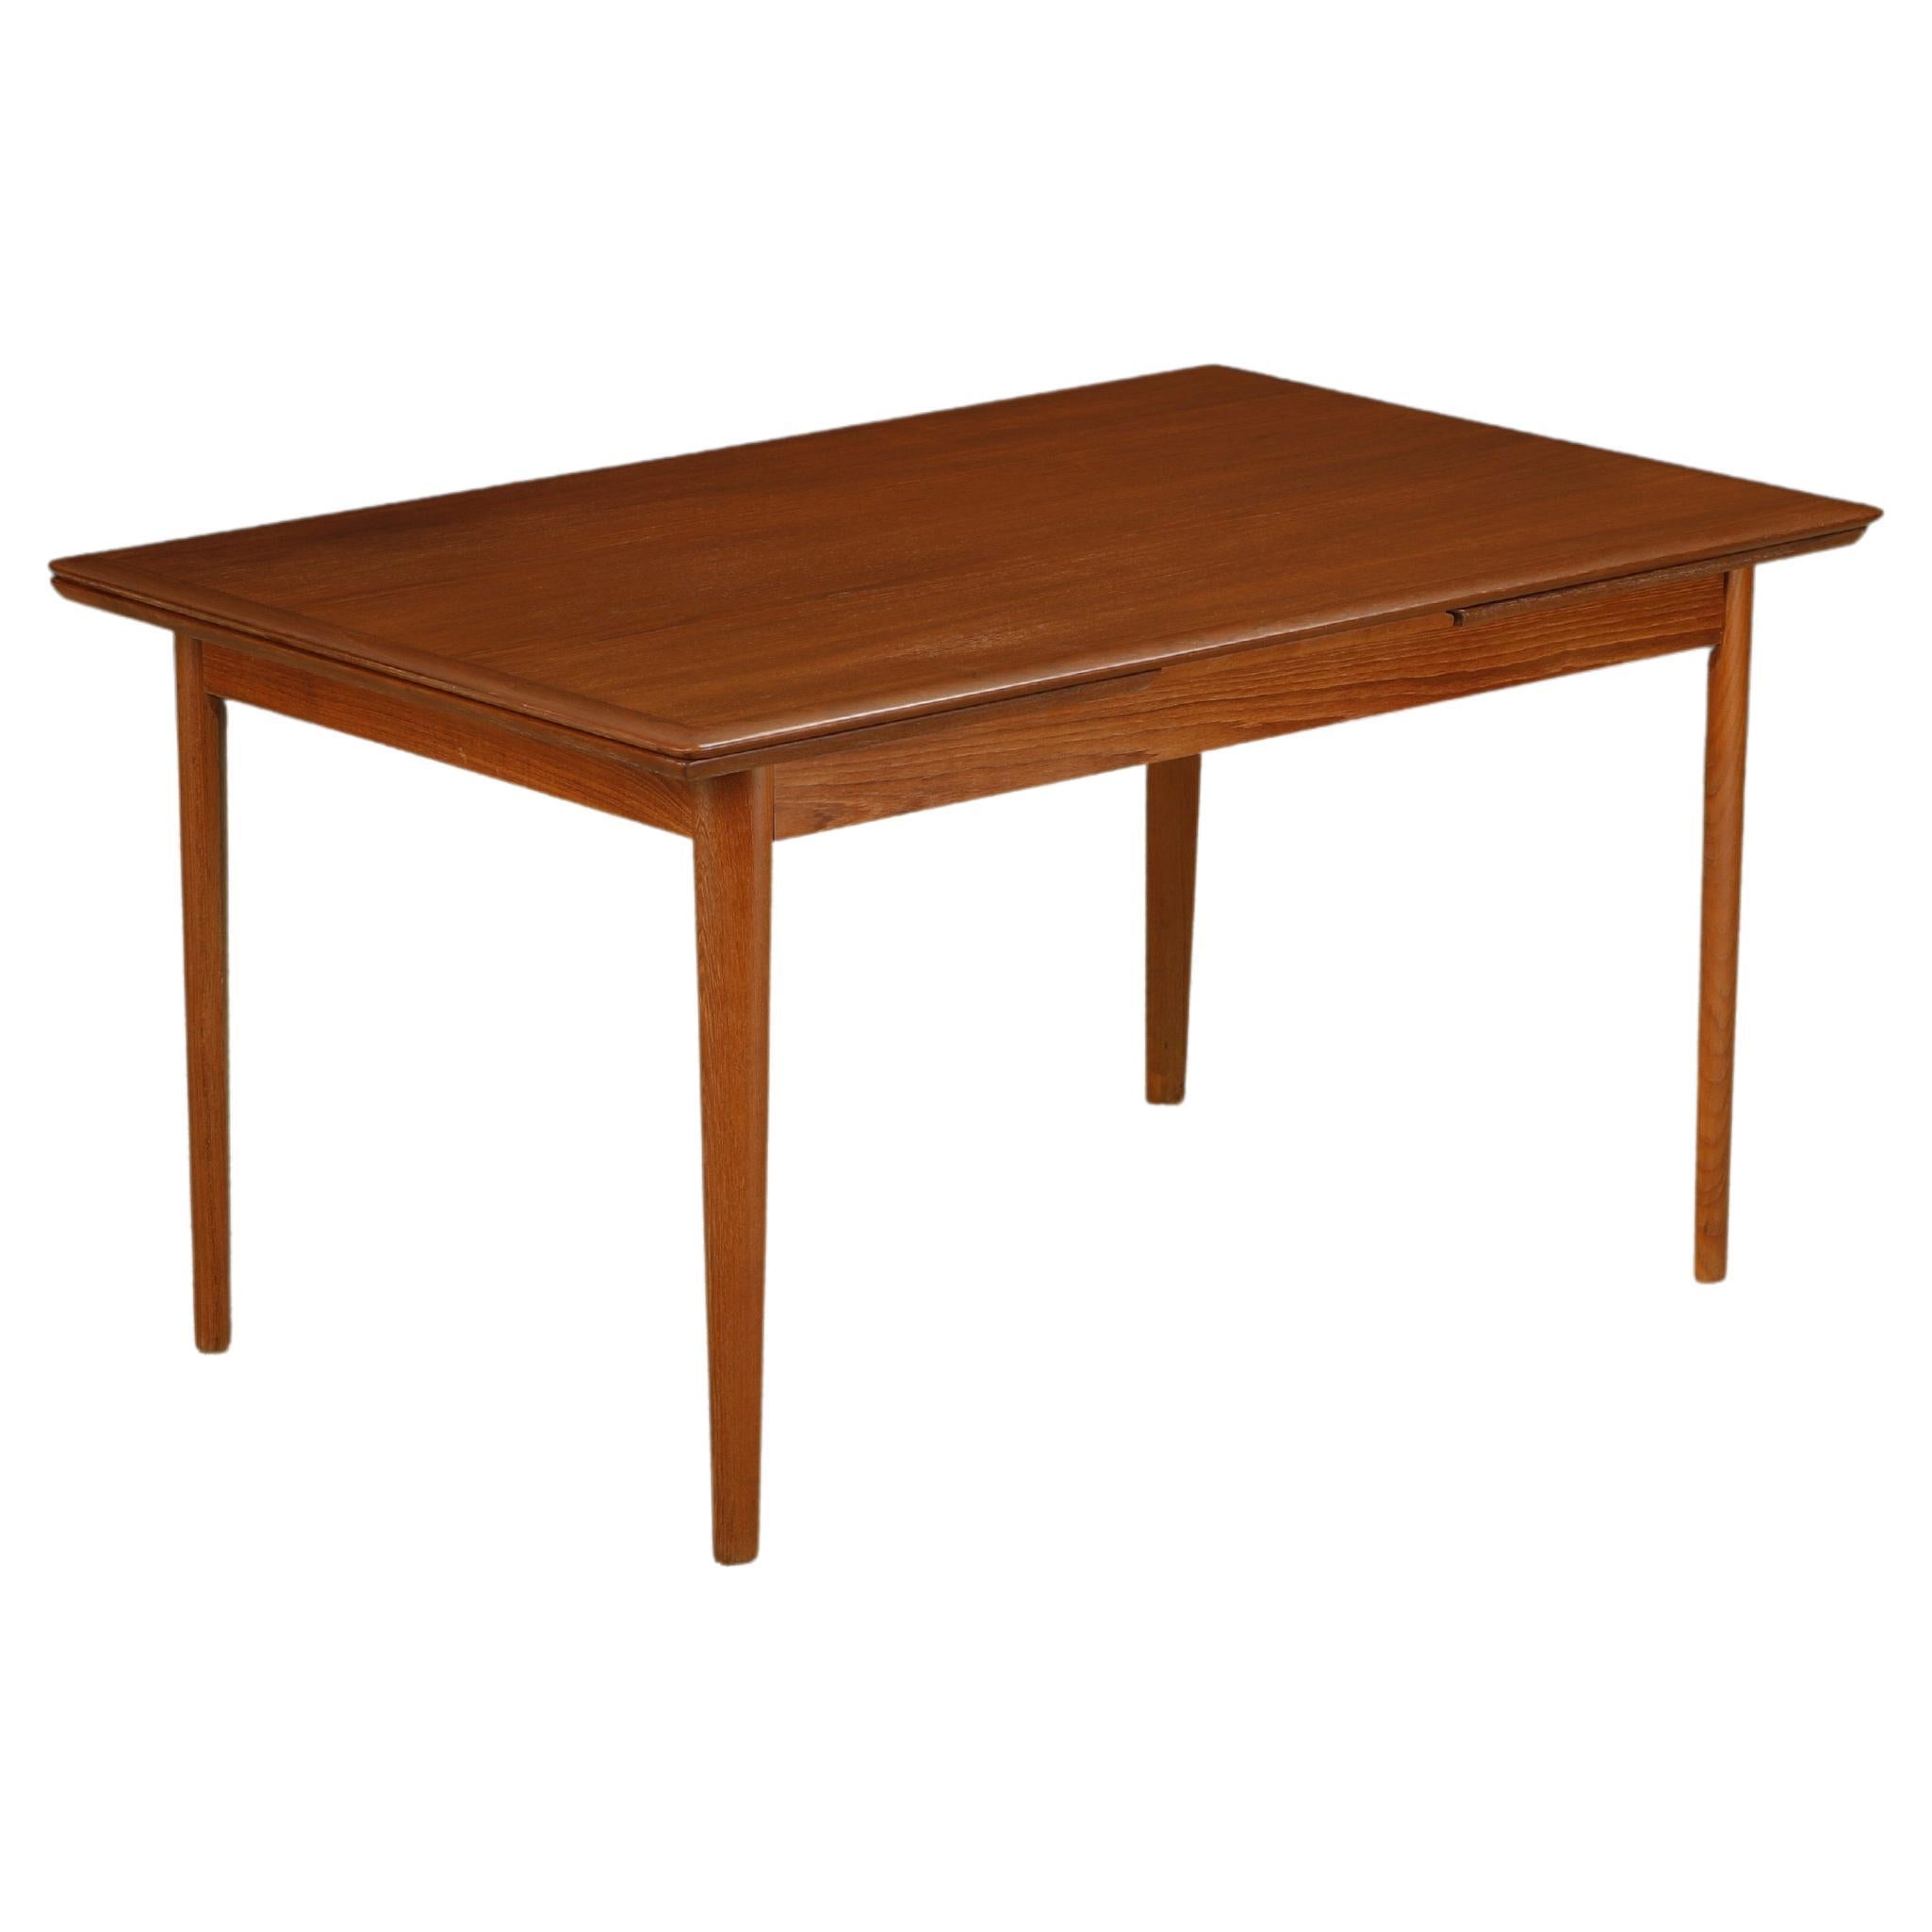 Danish Modern Expandable Teak Dining Table, c 1960s, Refinished For Sale